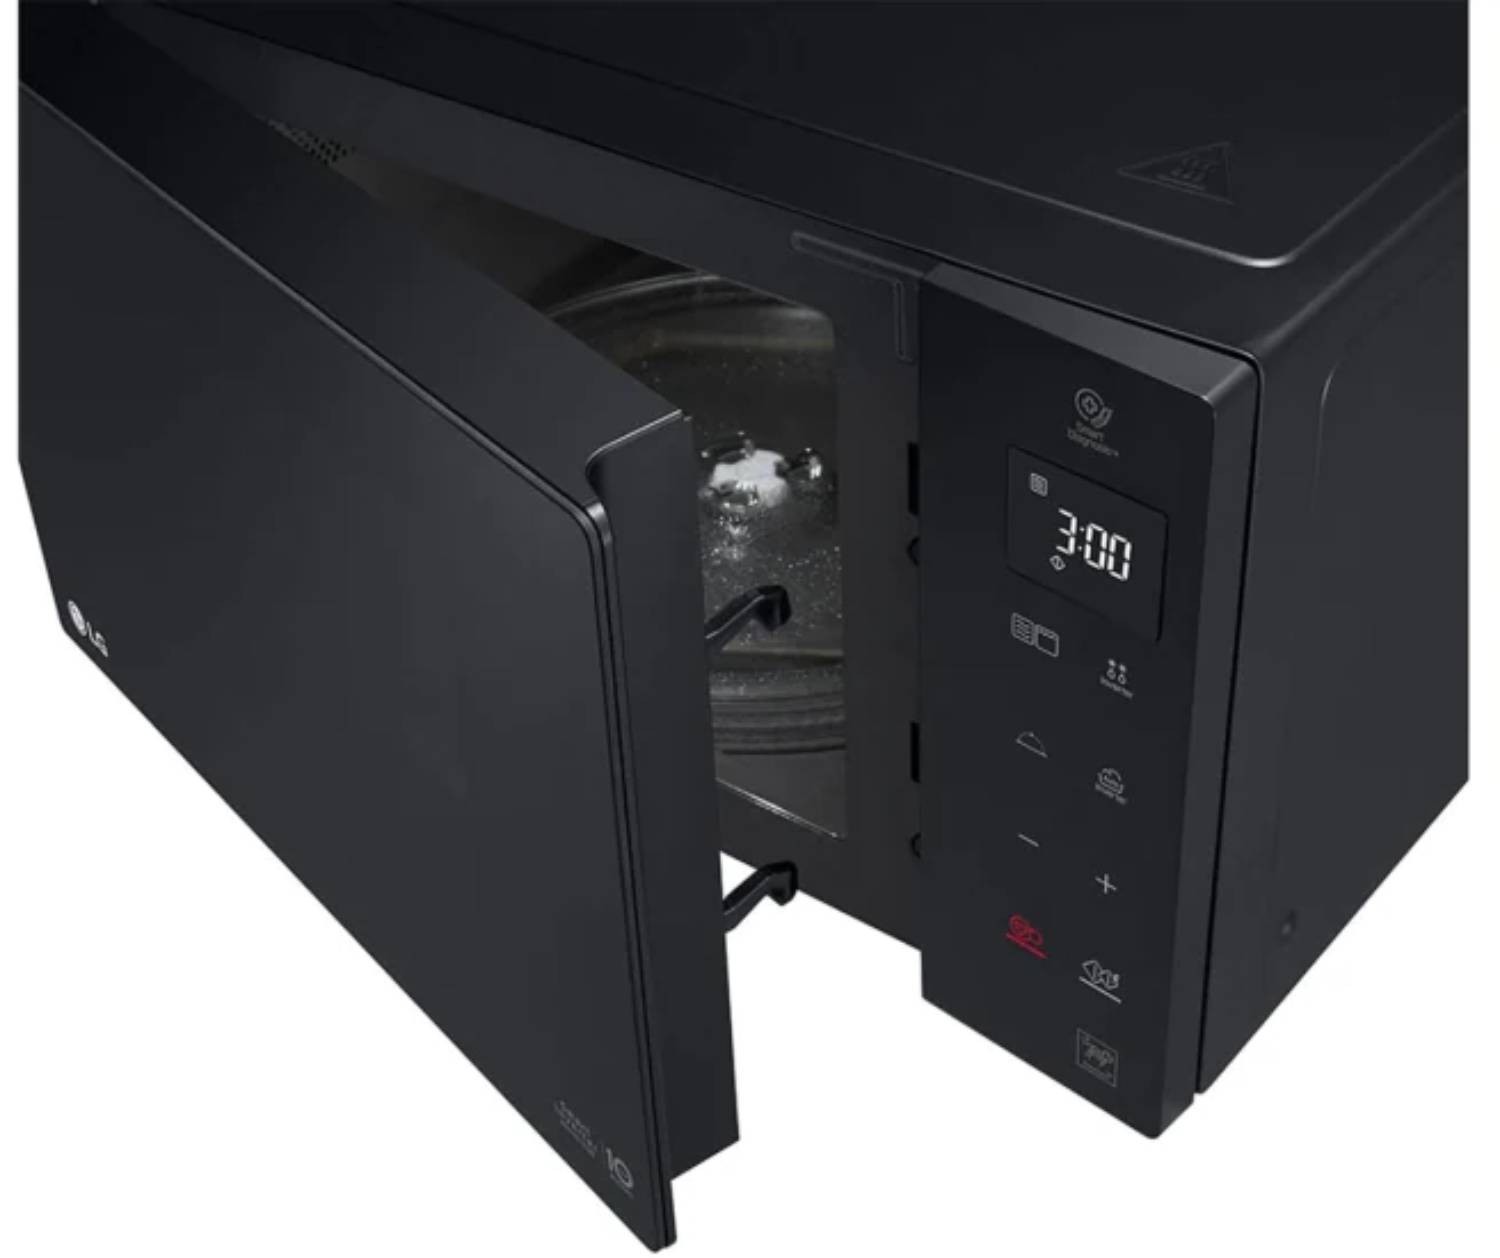 LG Micro ondes Grill 1000W 25L Noir - MH6535GDS